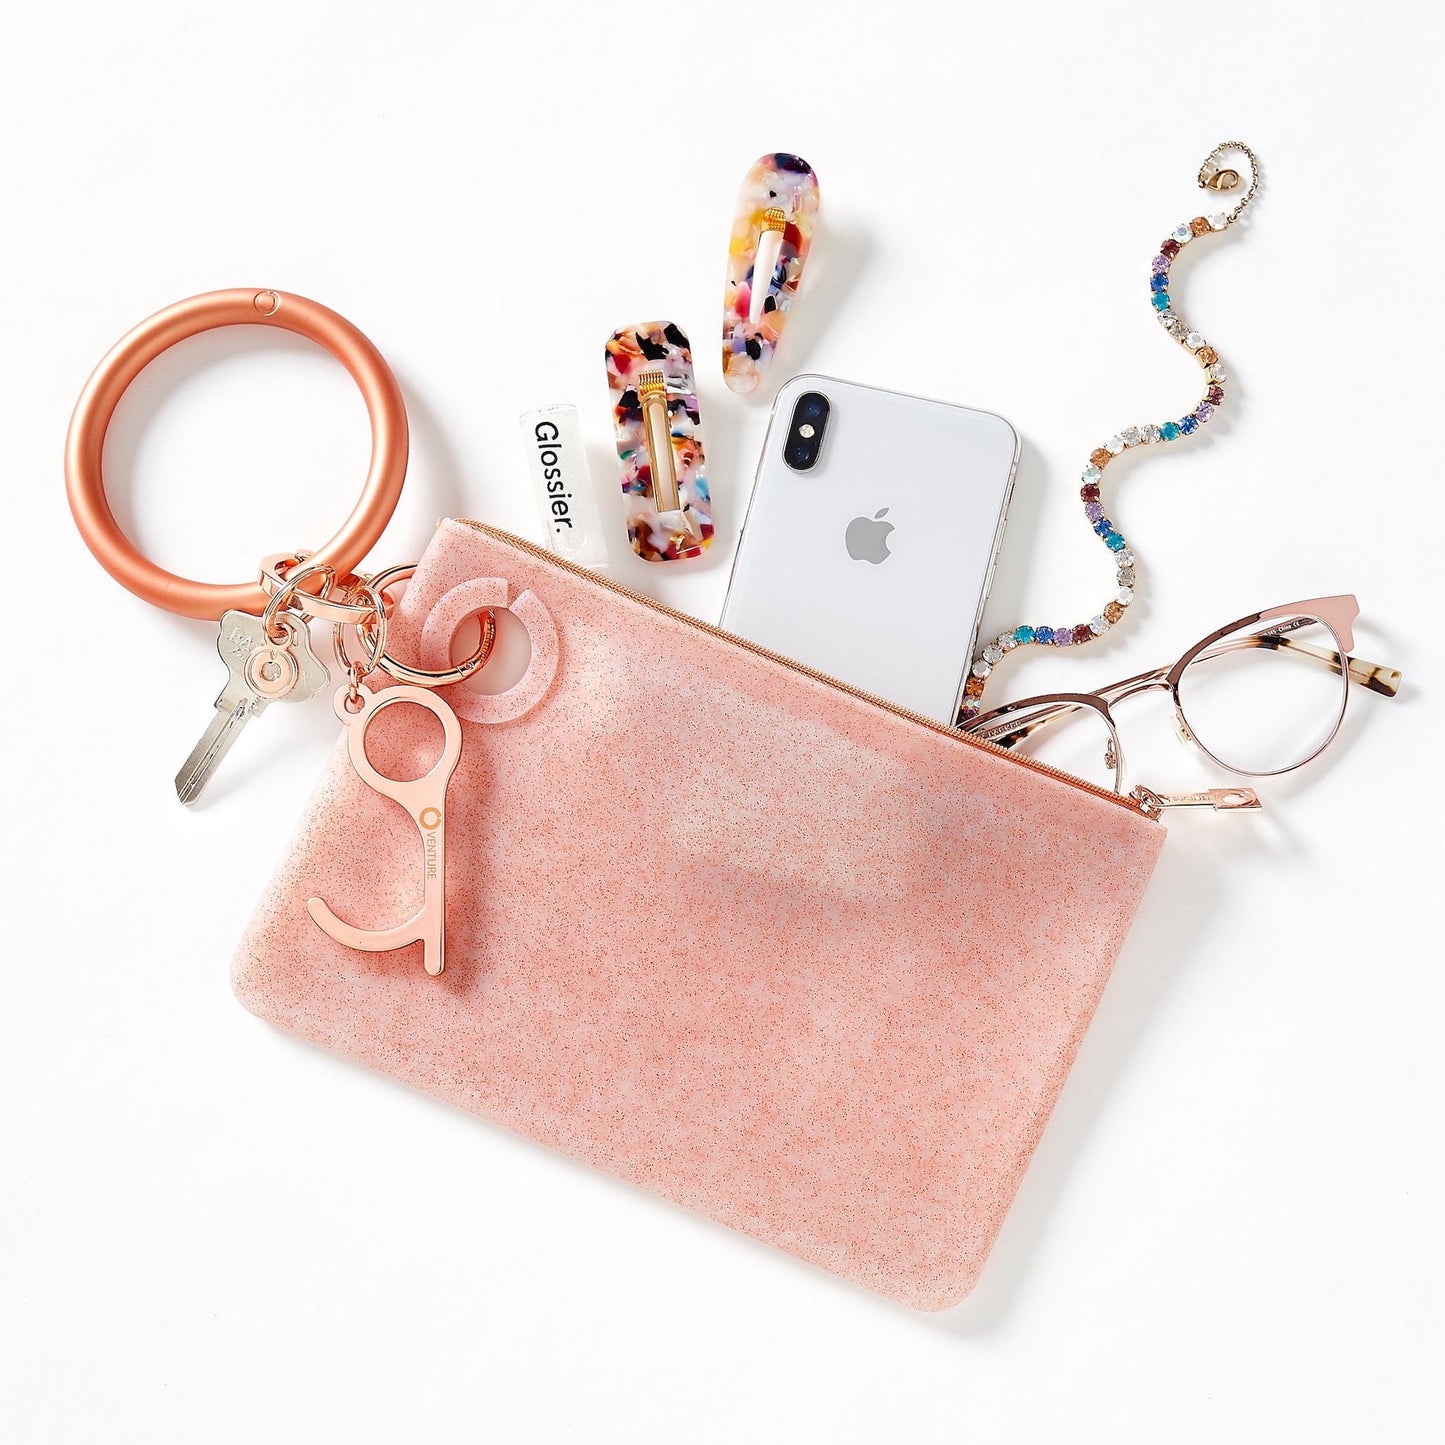 Oventure Large silicone pouch holding phone, glasses, lip gloss and hair clips.